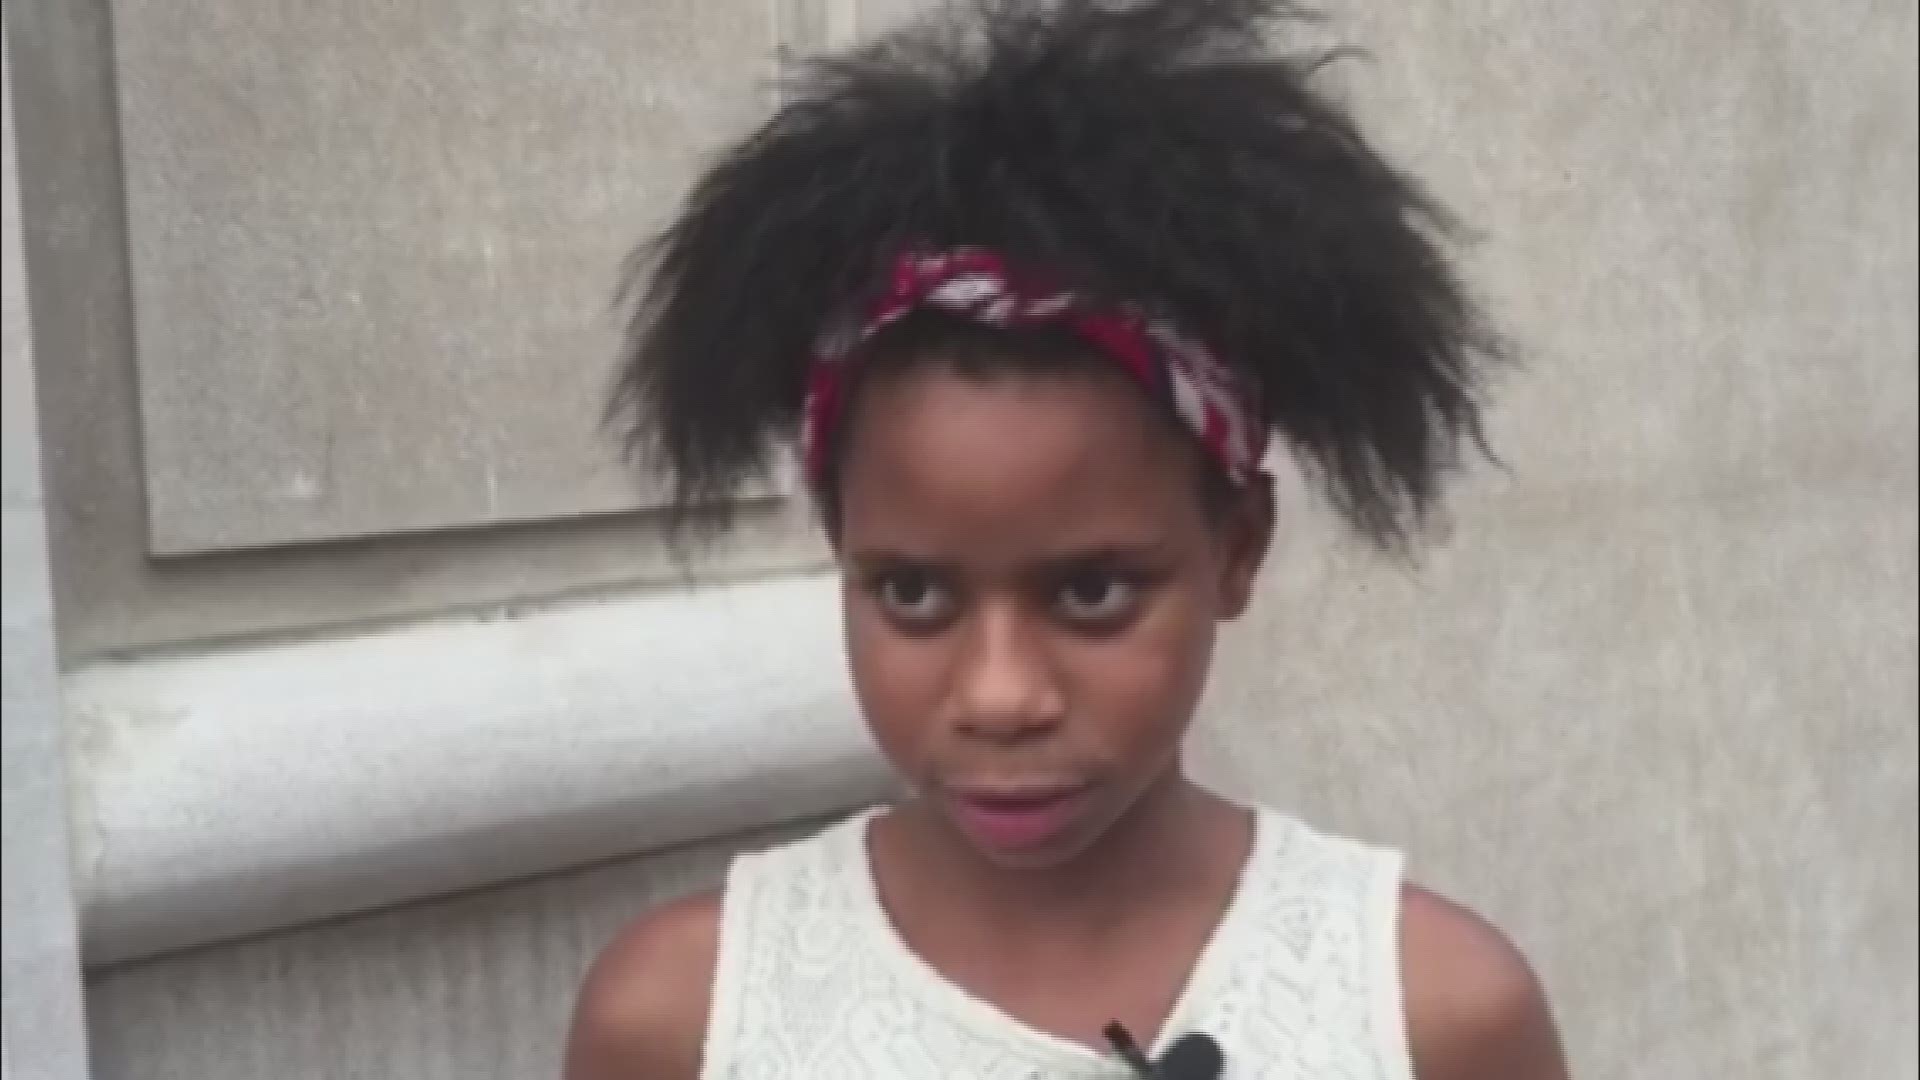 Kids share their thoughts on politics